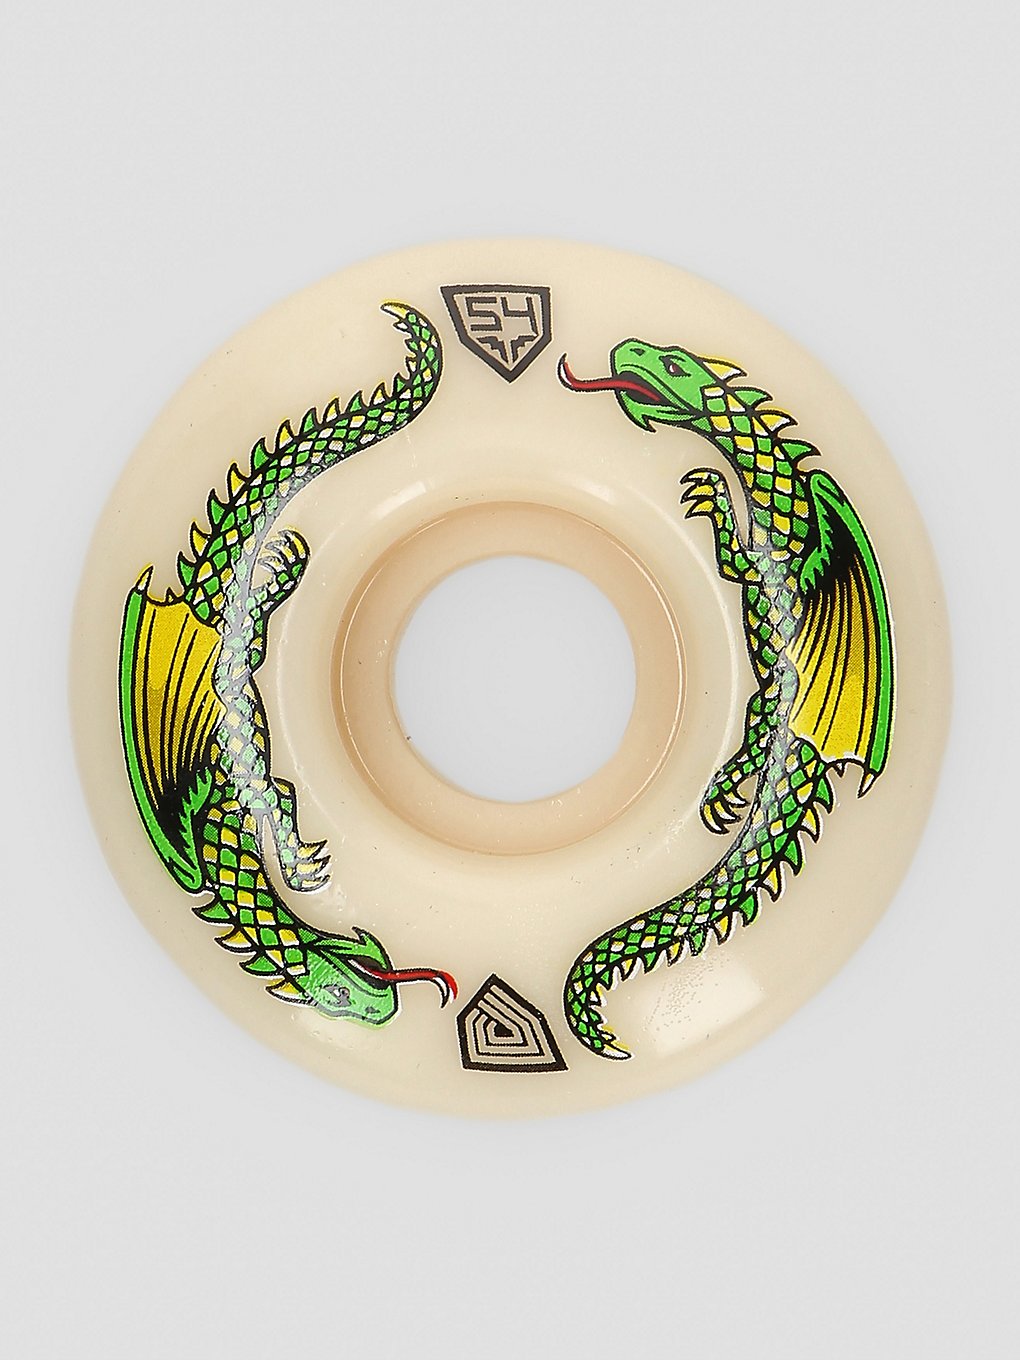 Image of Powell Peralta Dragons 93A V1 Standard 54mm Ruote bianco